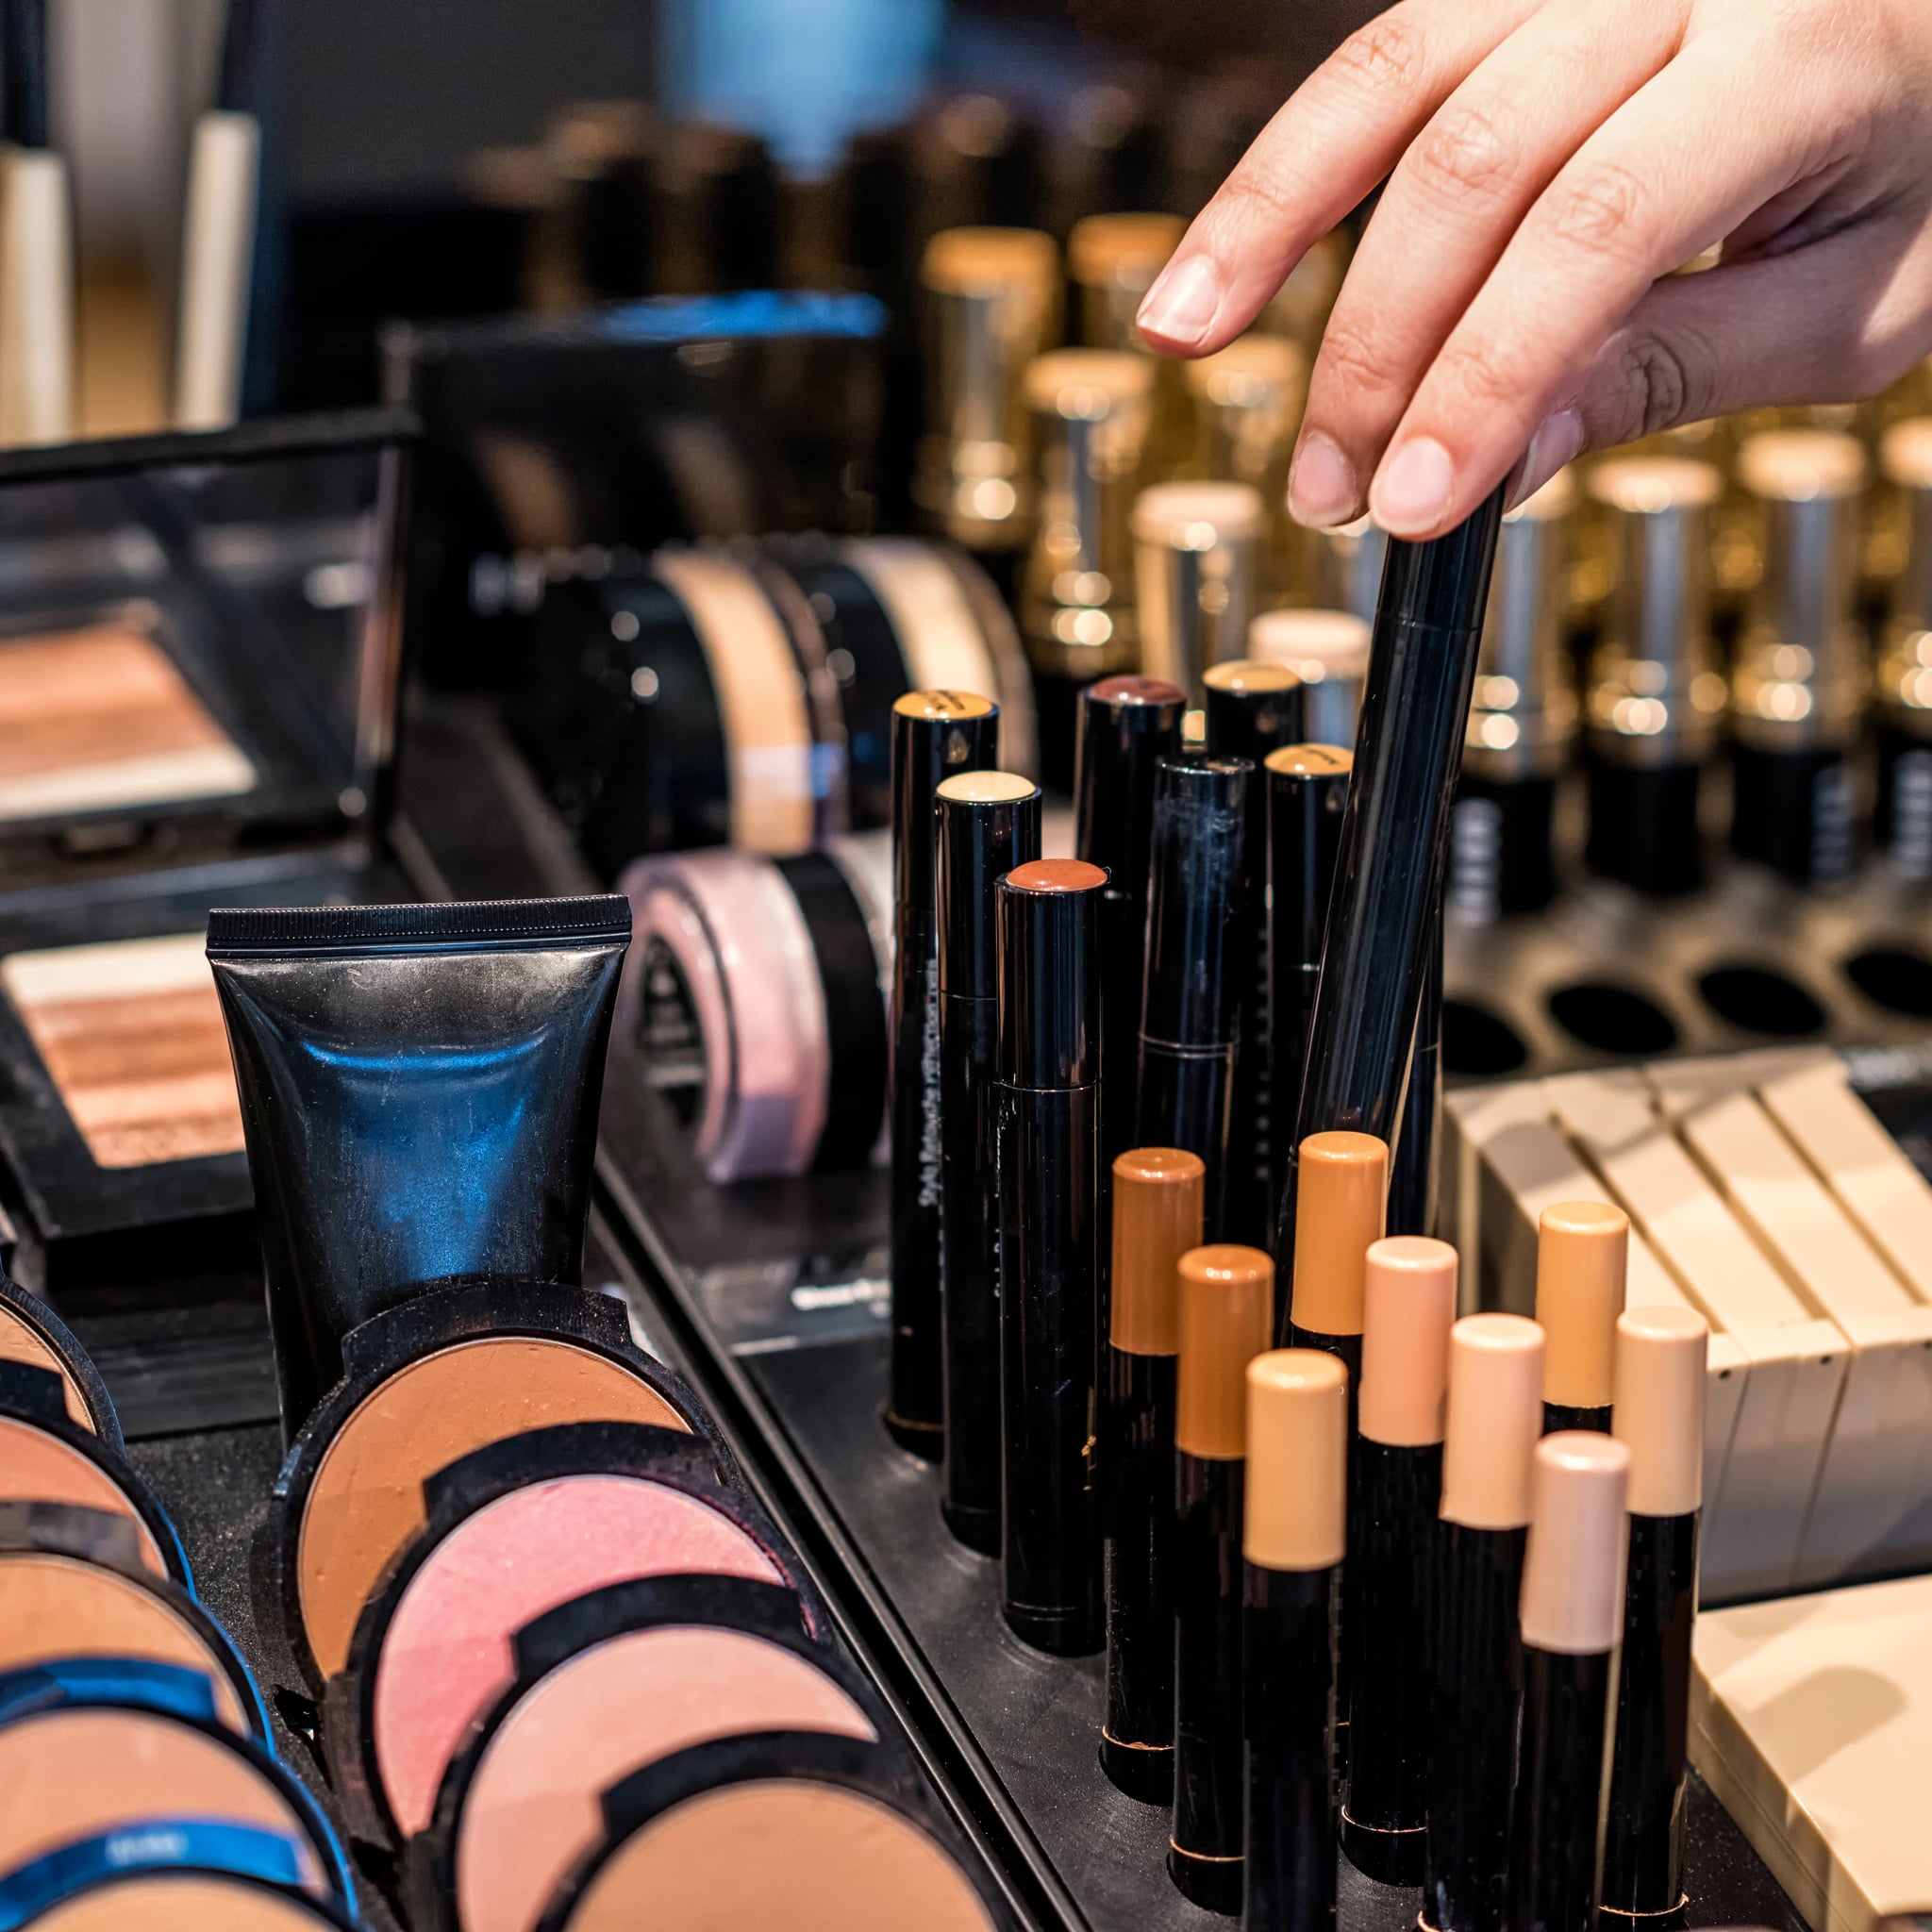 Are In-Store Makeup Testers Safe Amid the Coronavirus? Beauty